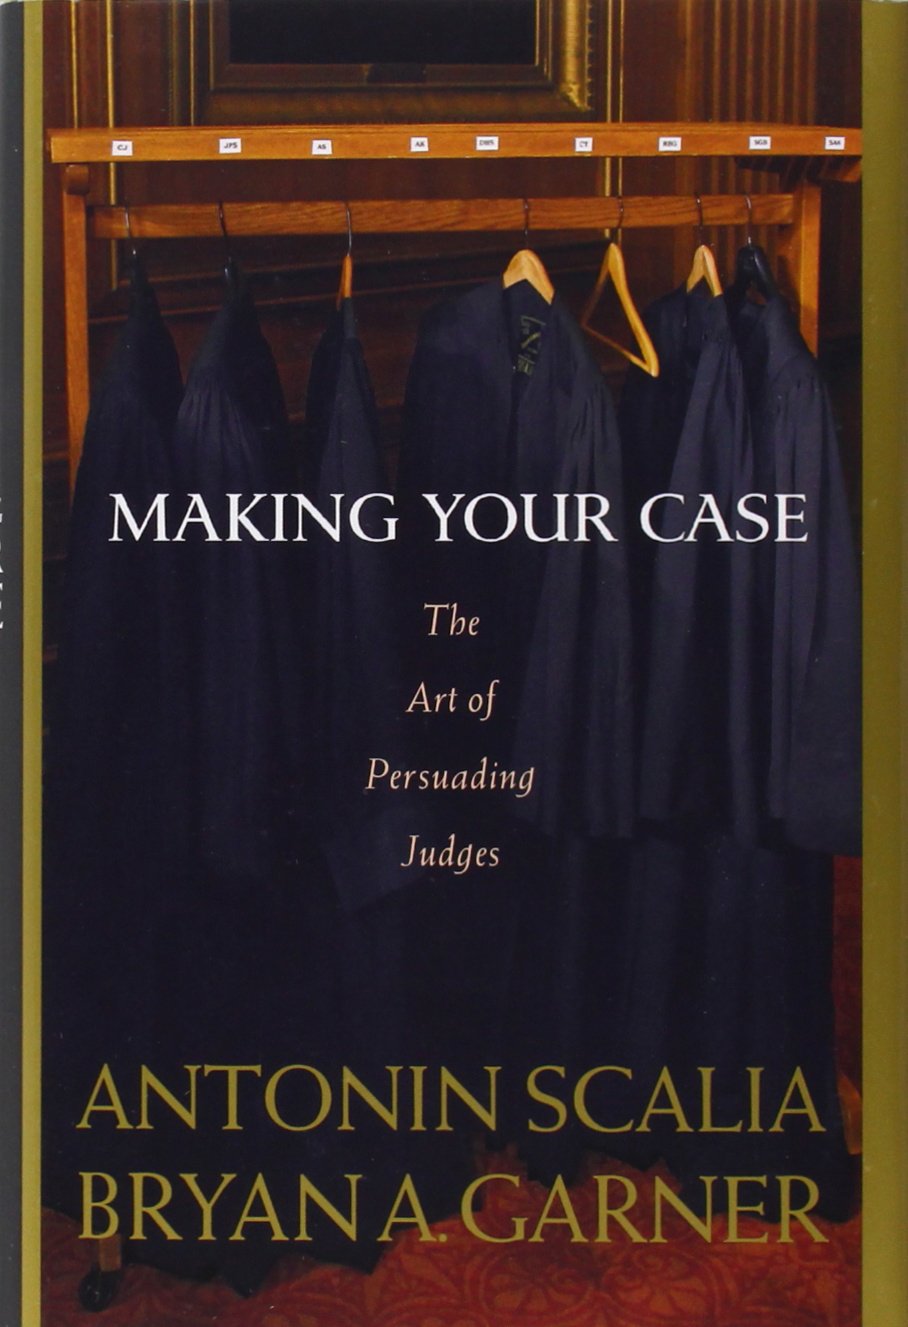 Making Your Case: The Art of Persuading Judges (Book Review)